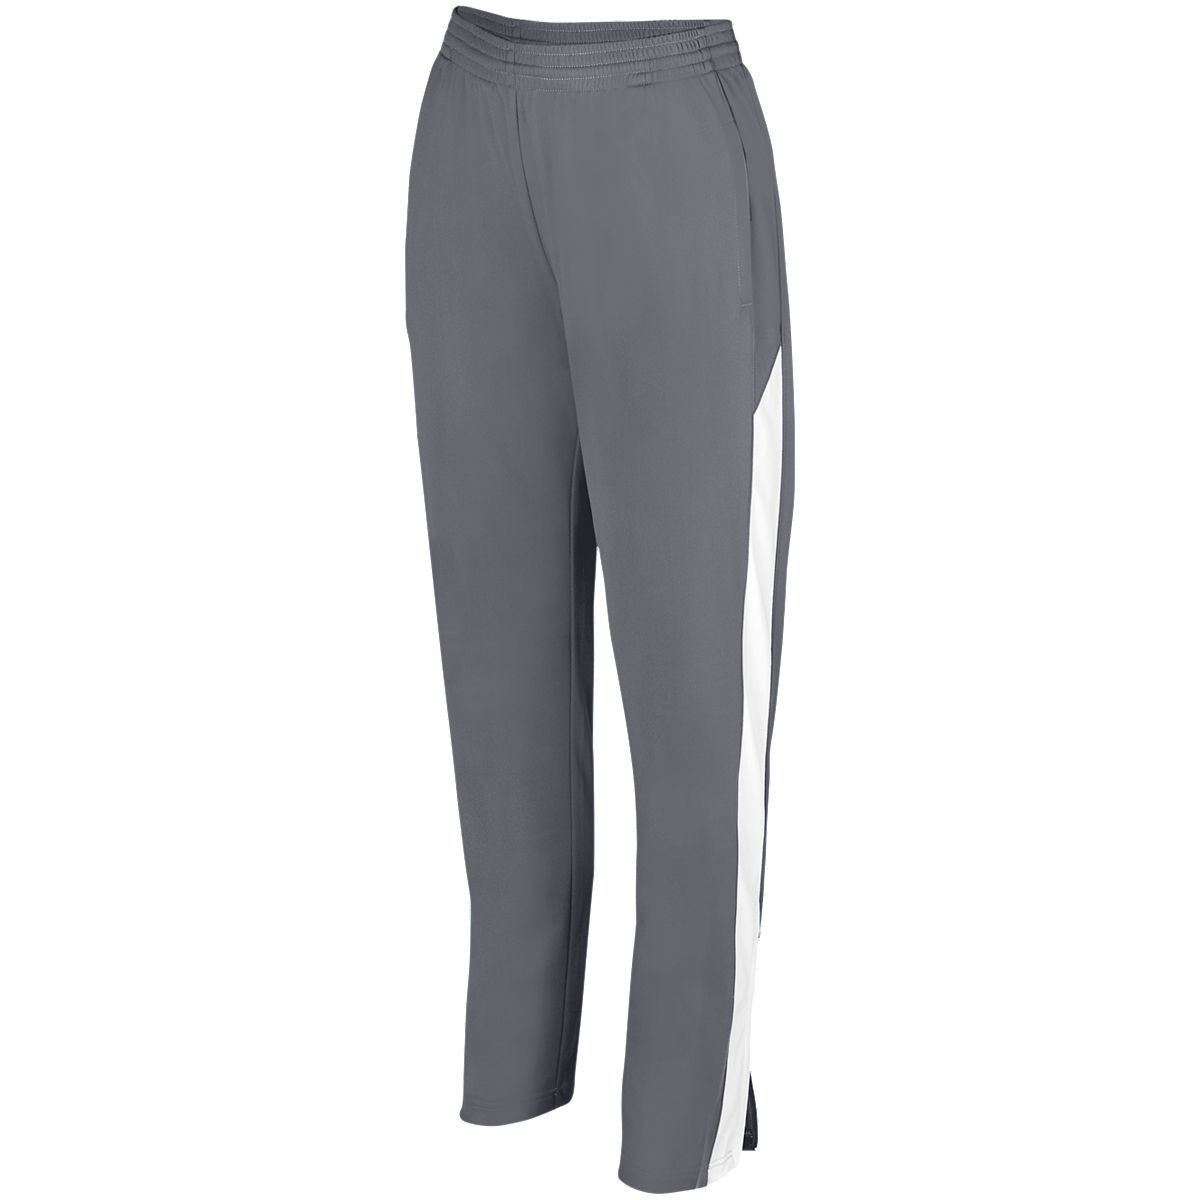 Augusta Sportswear Ladies Medalist Pant 2.0 in Graphite/White  -Part of the Ladies, Ladies-Pants, Pants, Augusta-Products product lines at KanaleyCreations.com